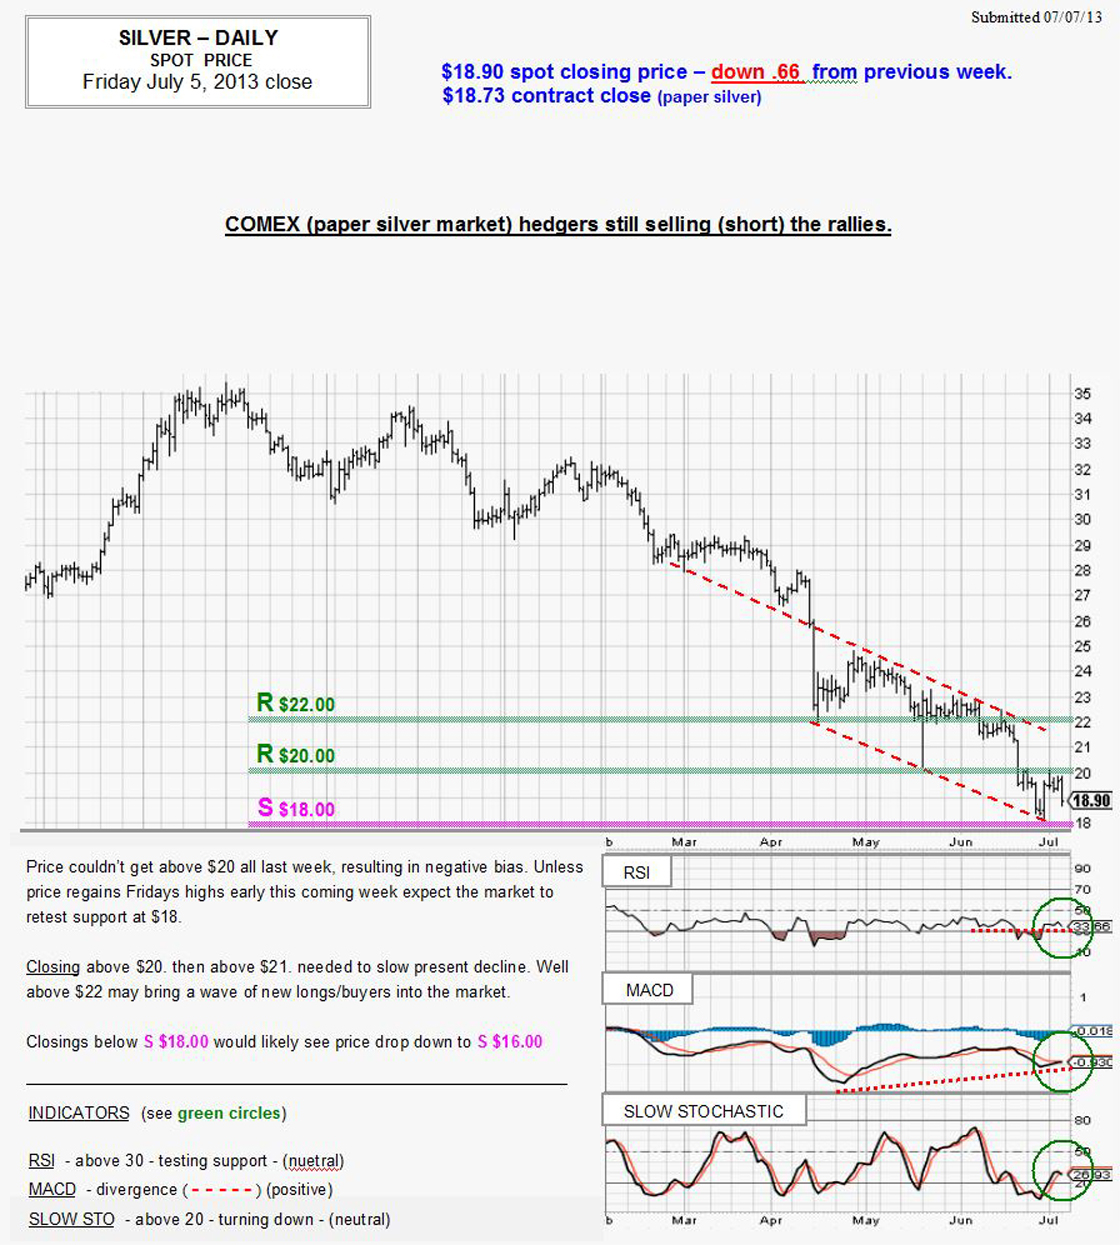 July 5, 2013 chart & commentary